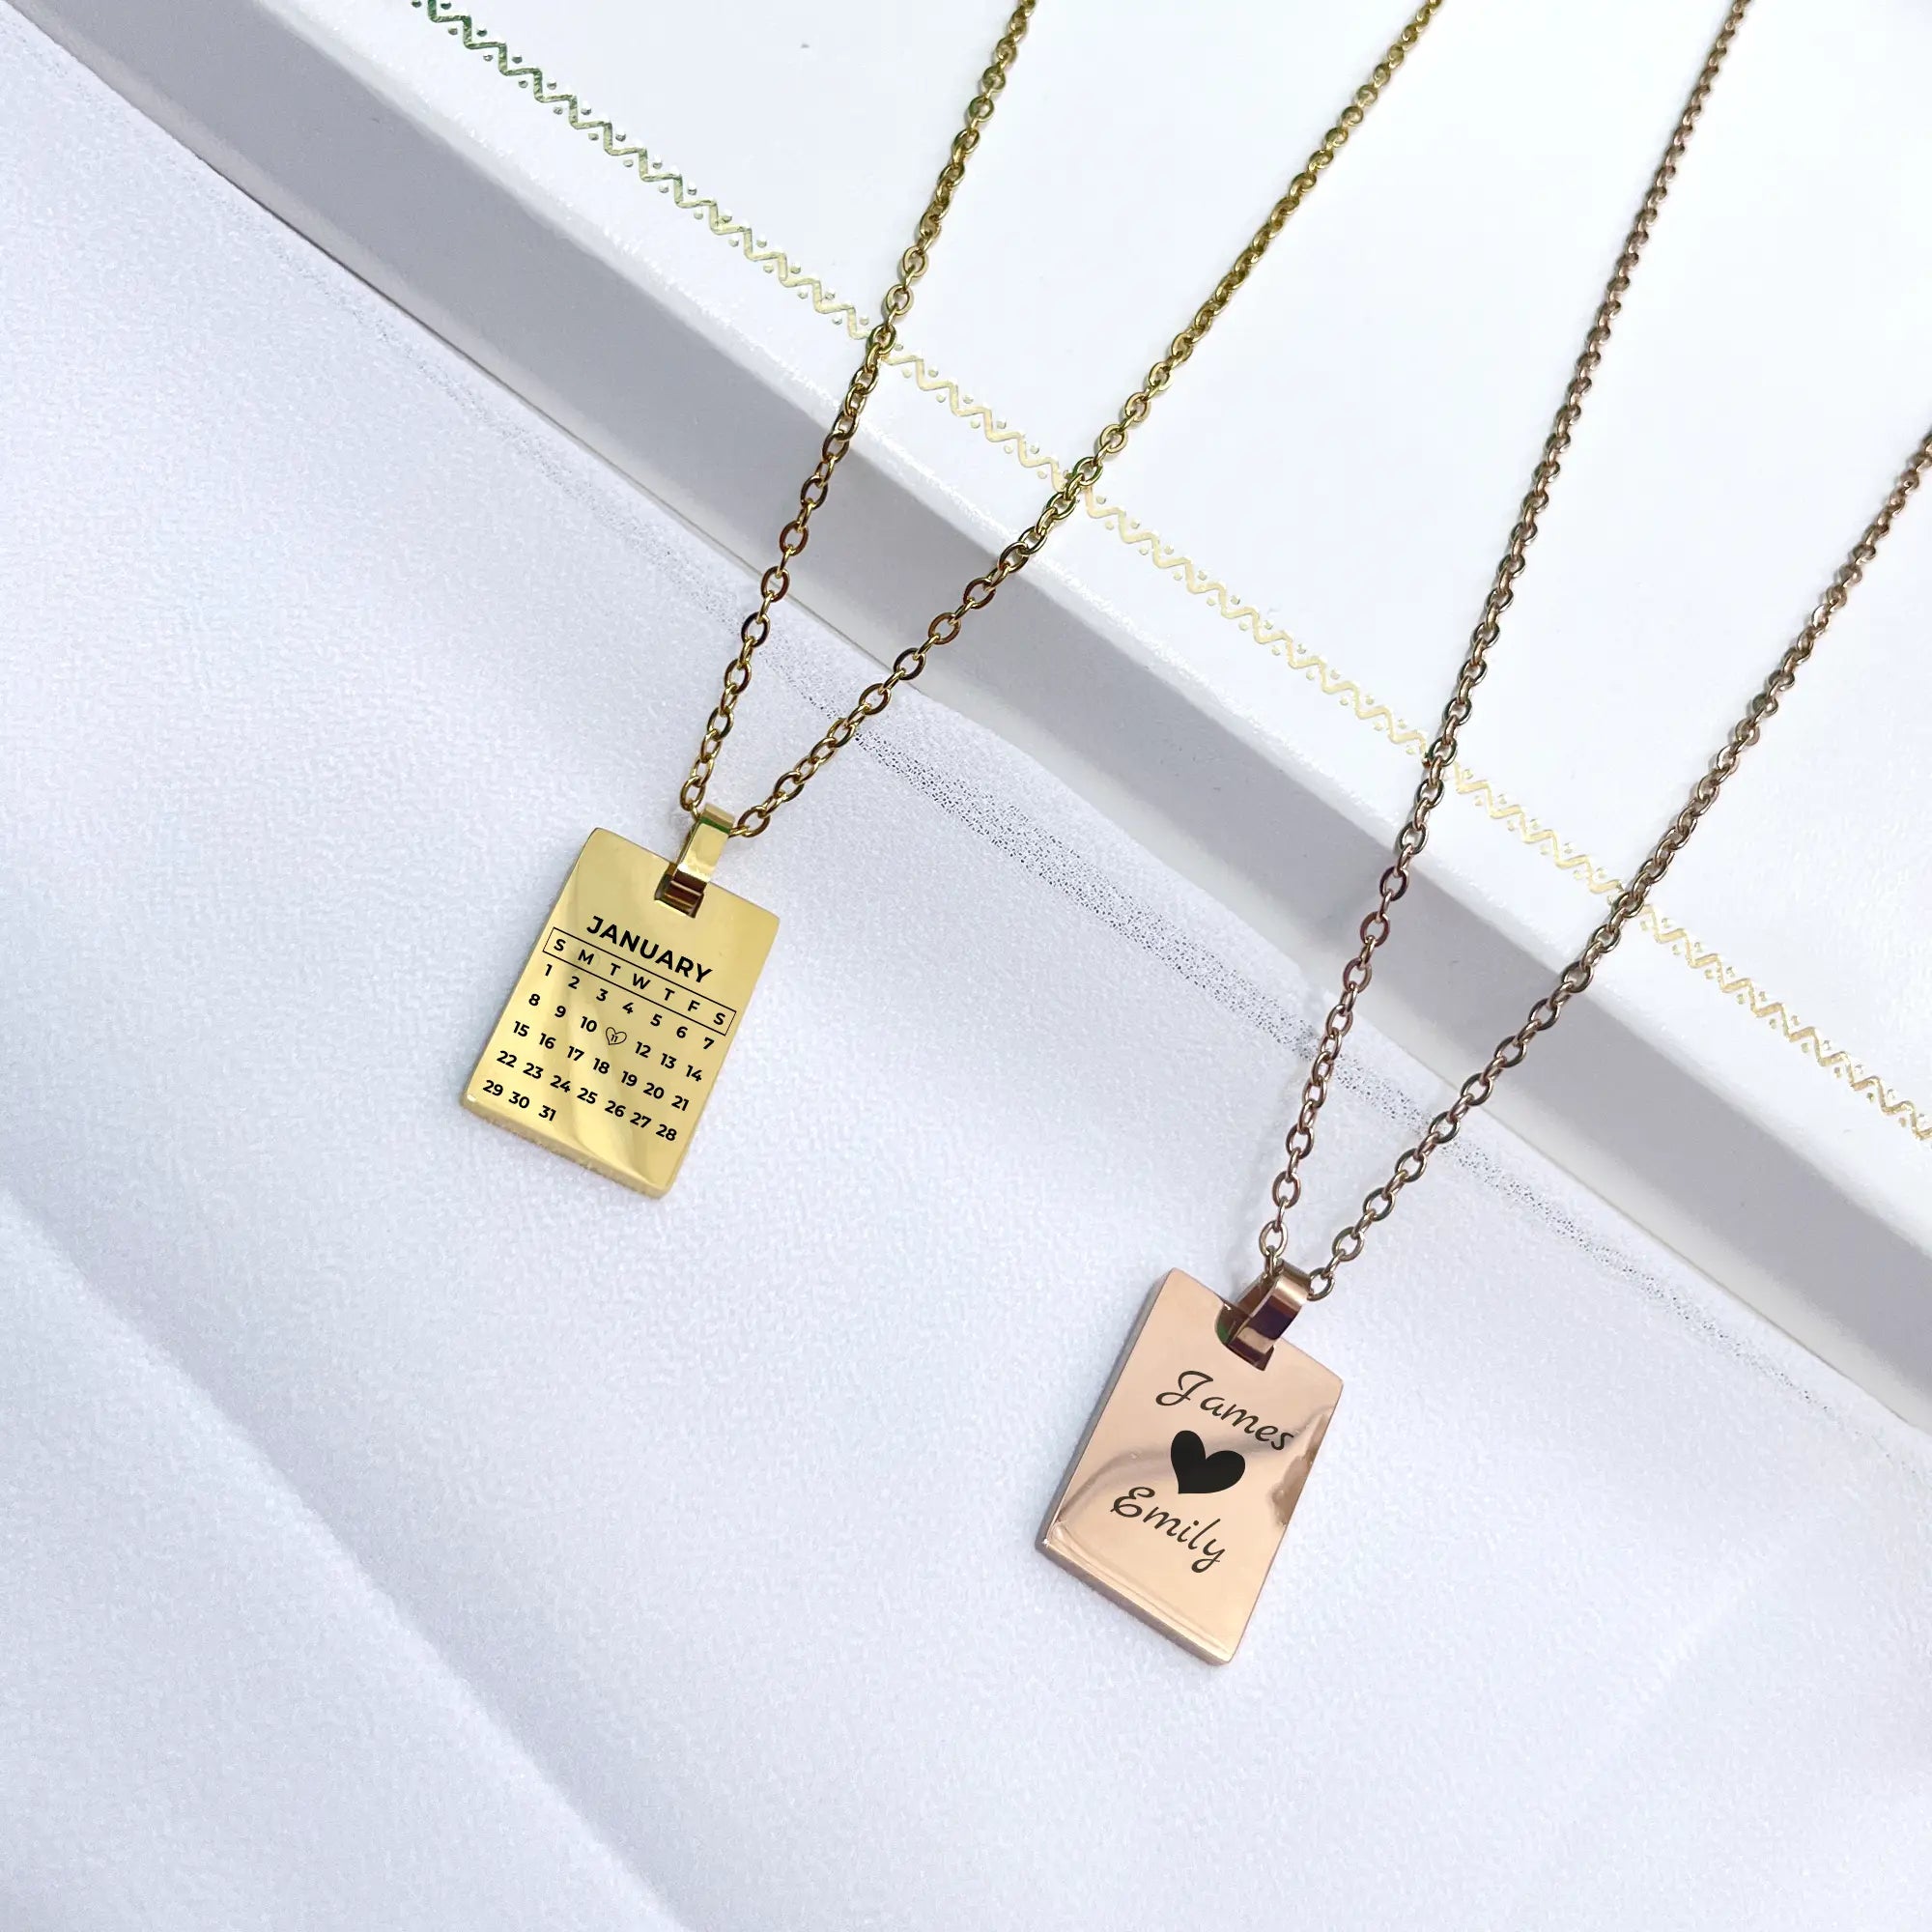 tag name necklace.